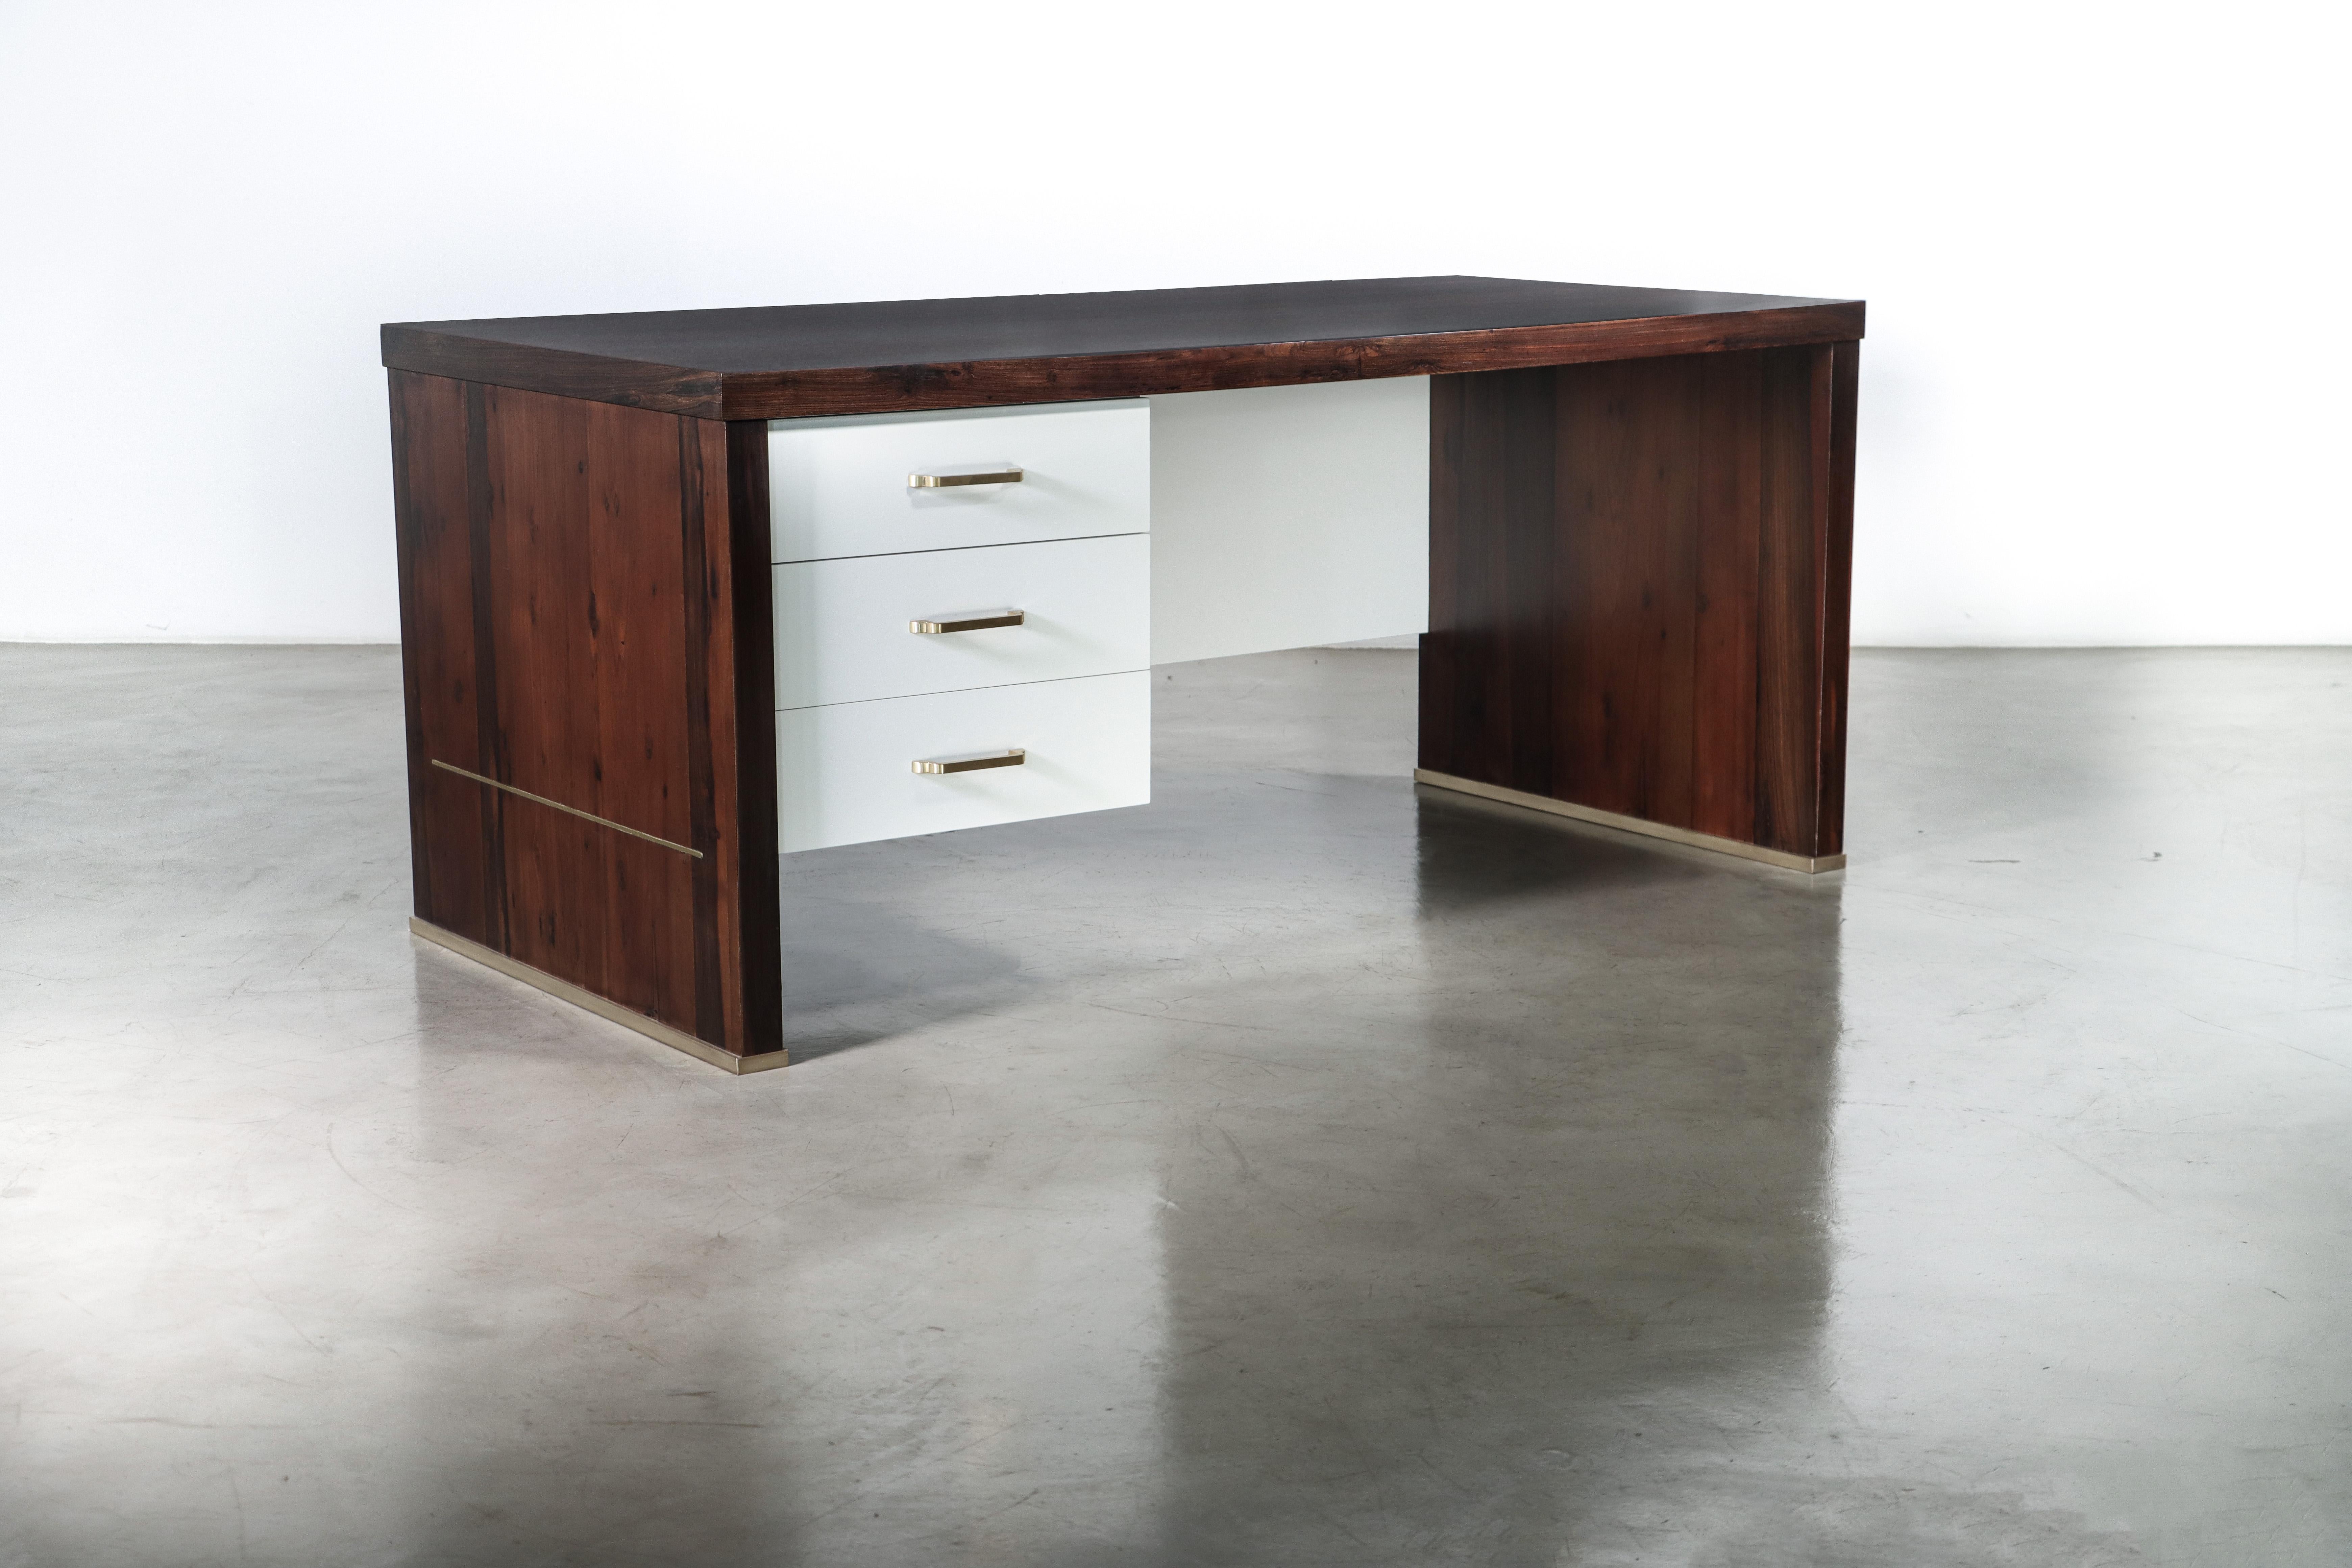 Lorenzo Modern Desk with Drawers in Argentine Rosewood & Bronze from Costantini

Measurements are 66